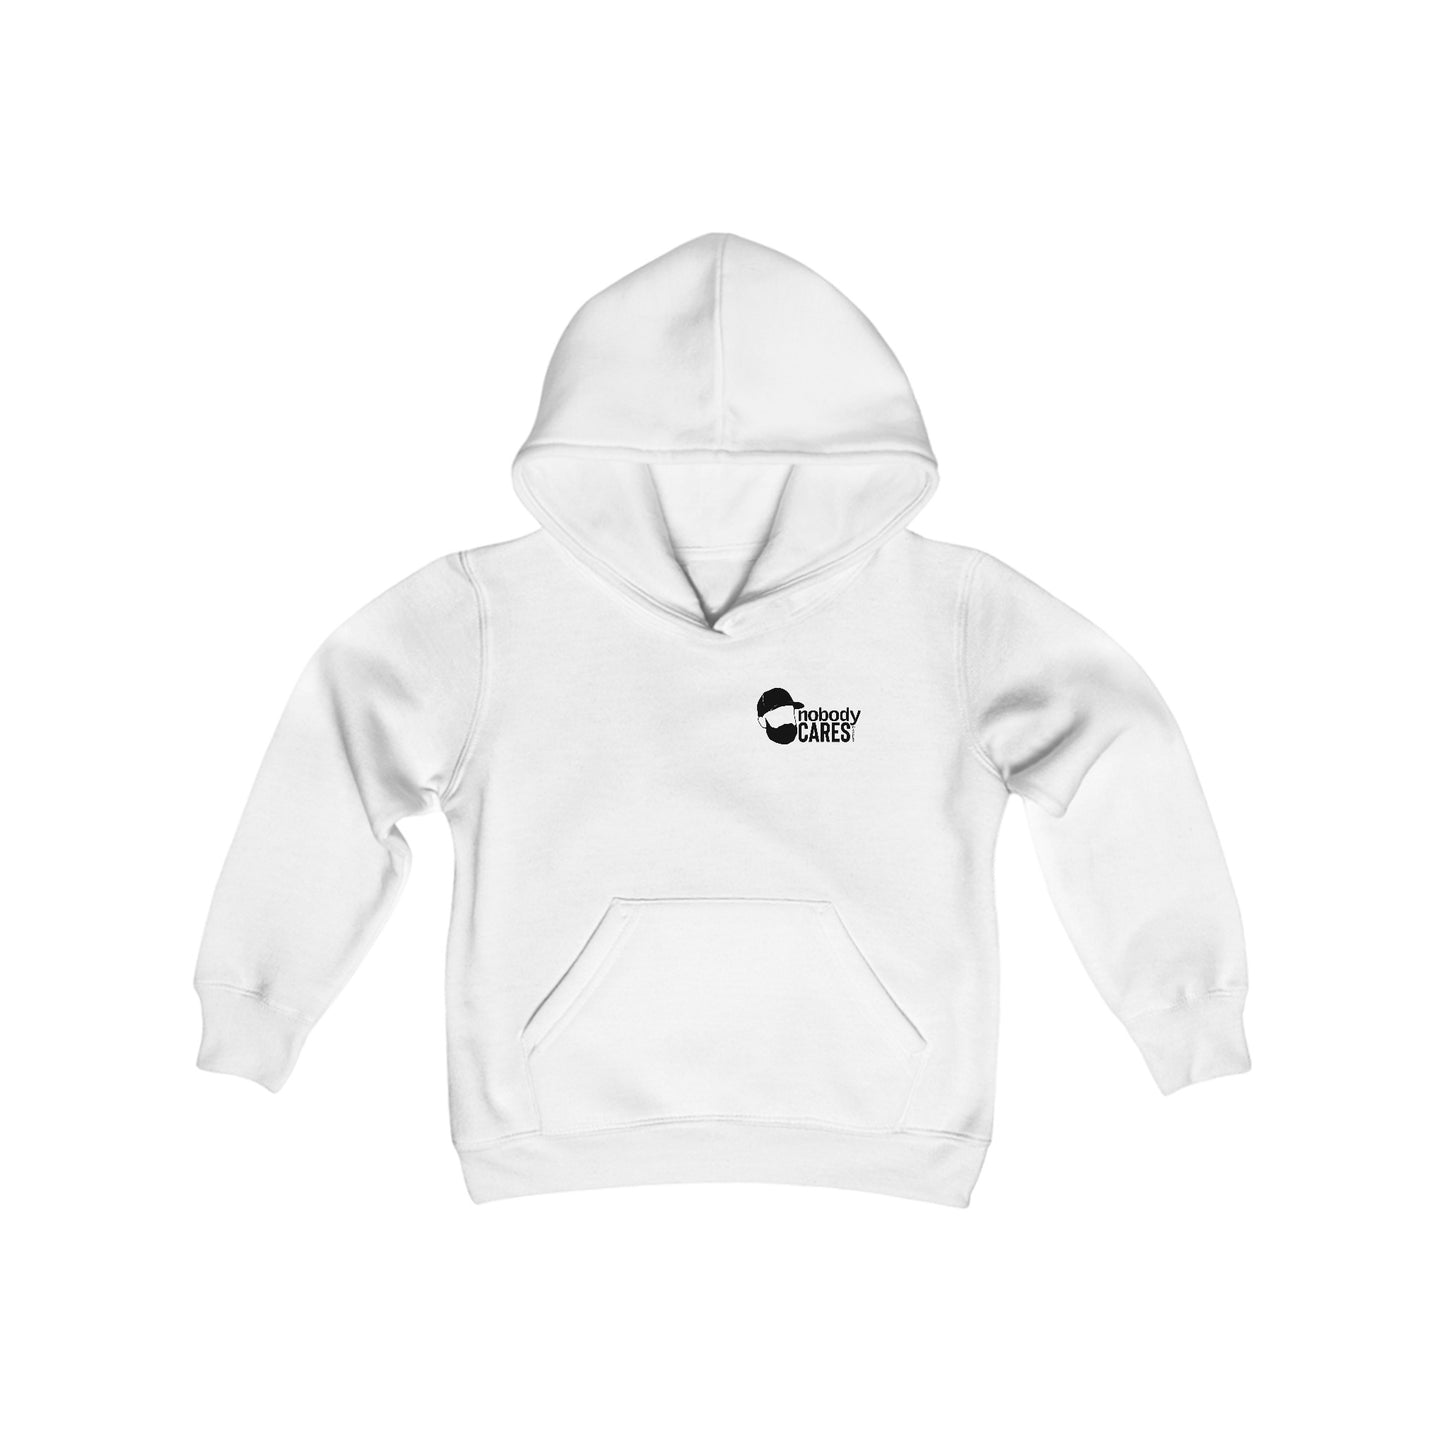 Youth, Nobodycares Anthony Hoodie